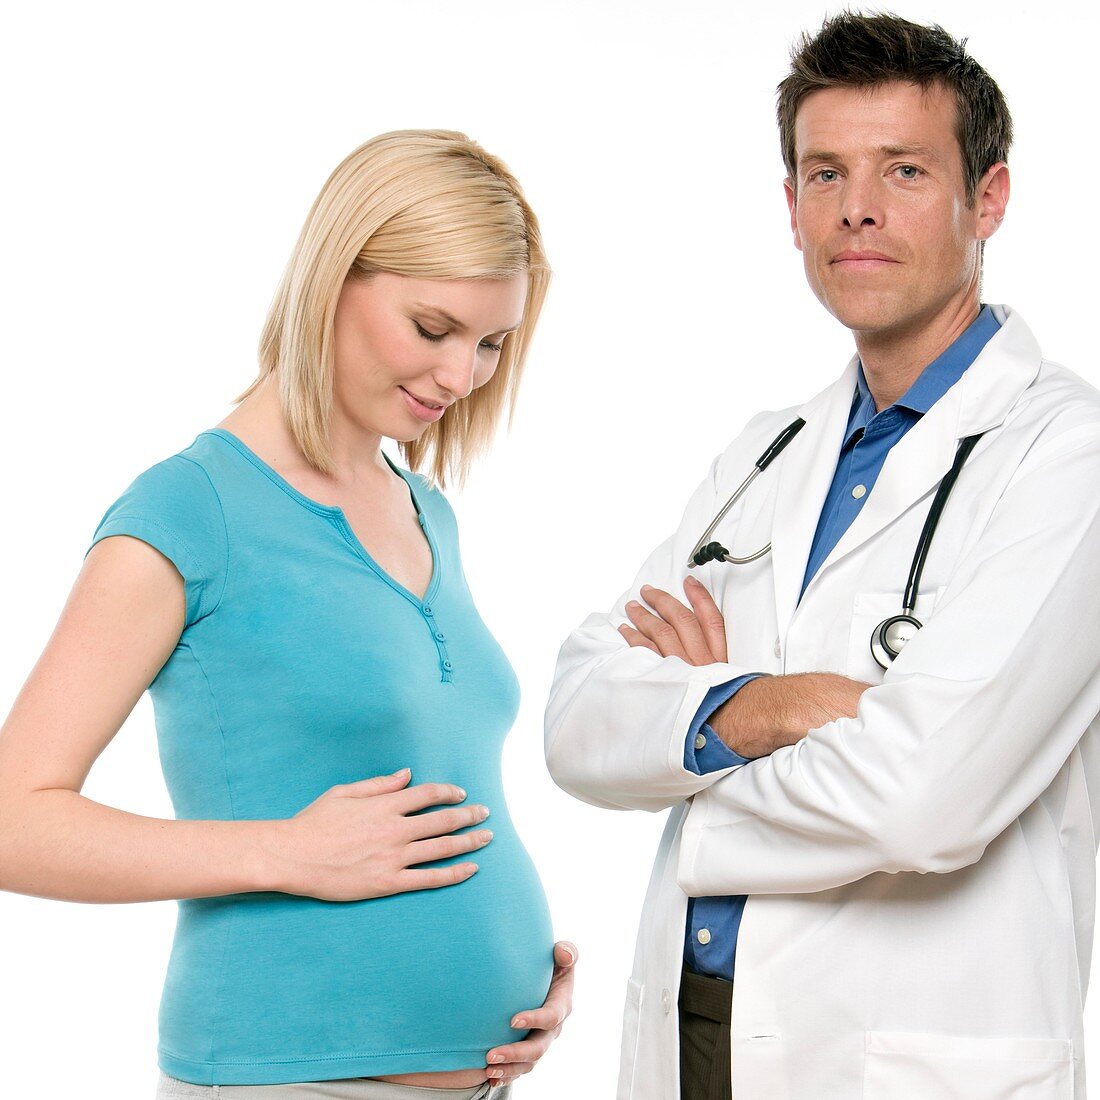 Obstetric consultation